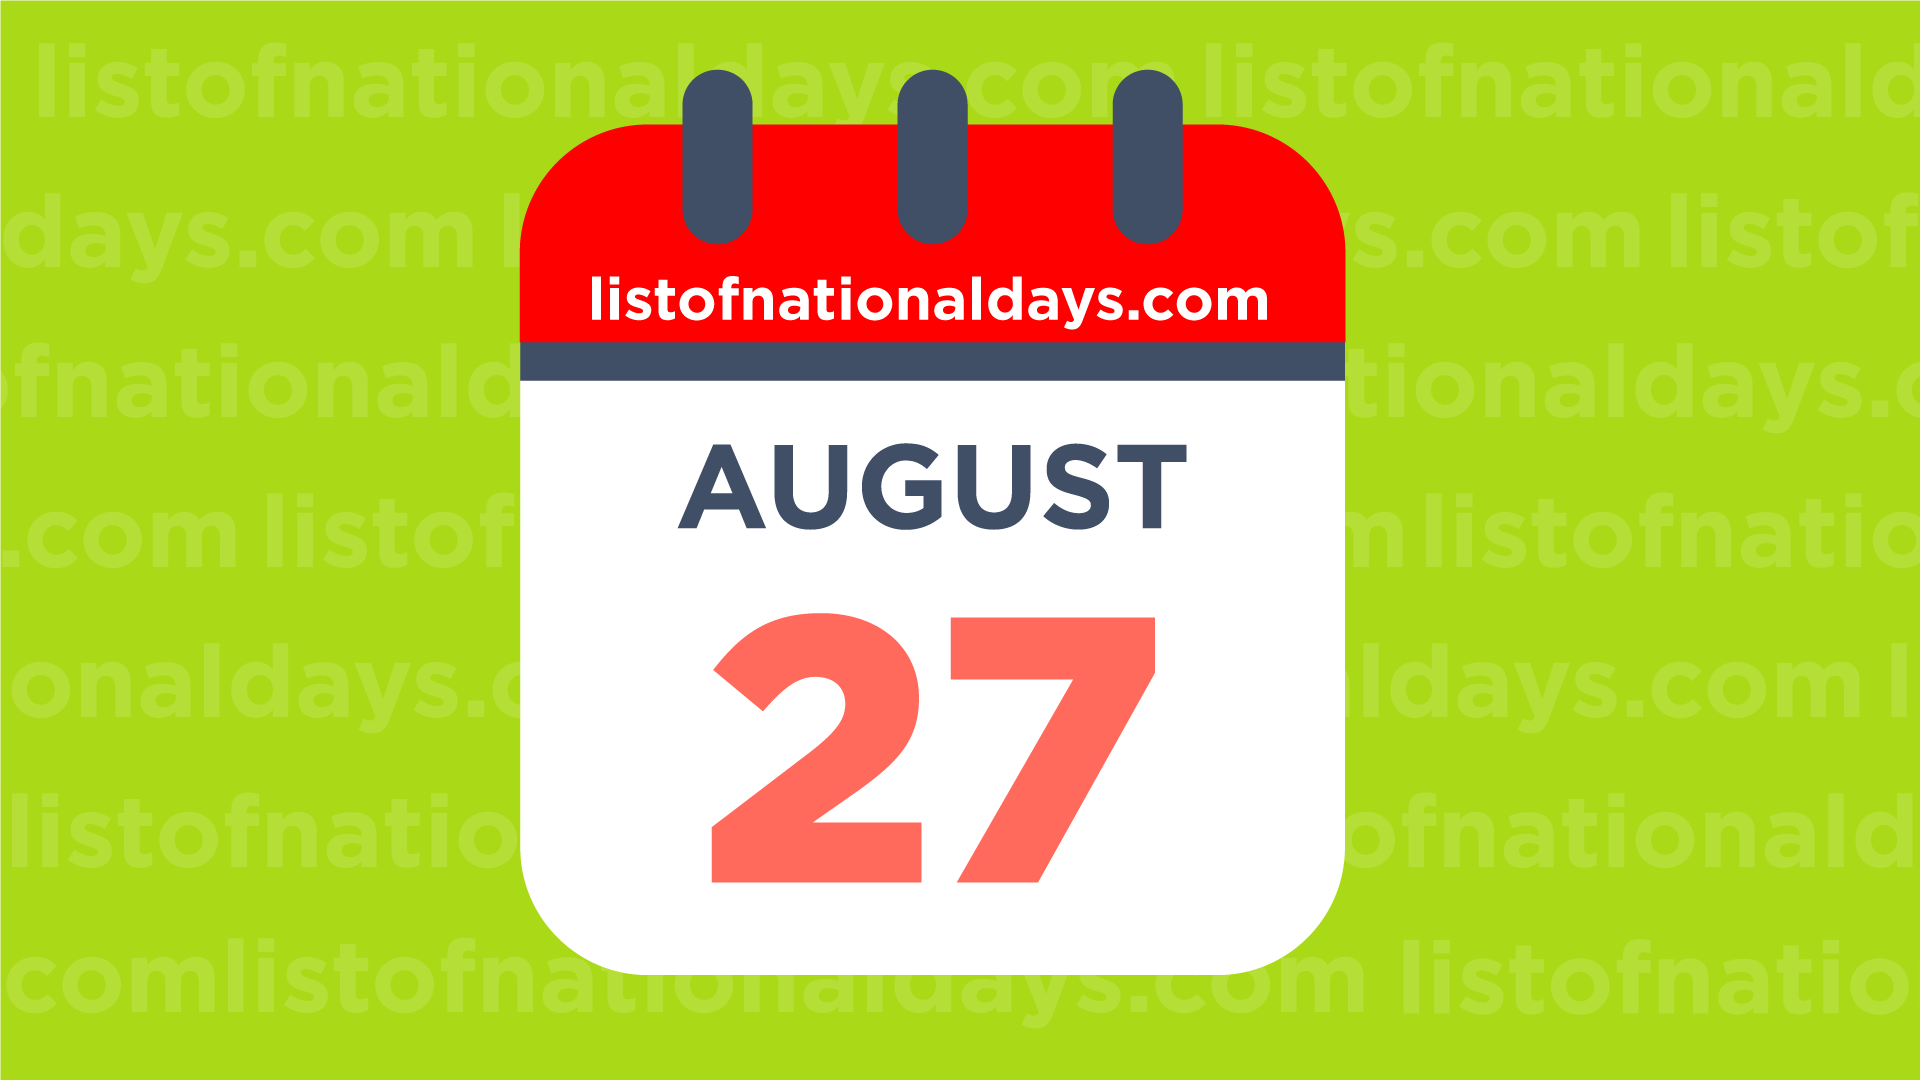 August 27th National Holidays and Famous Birthdays